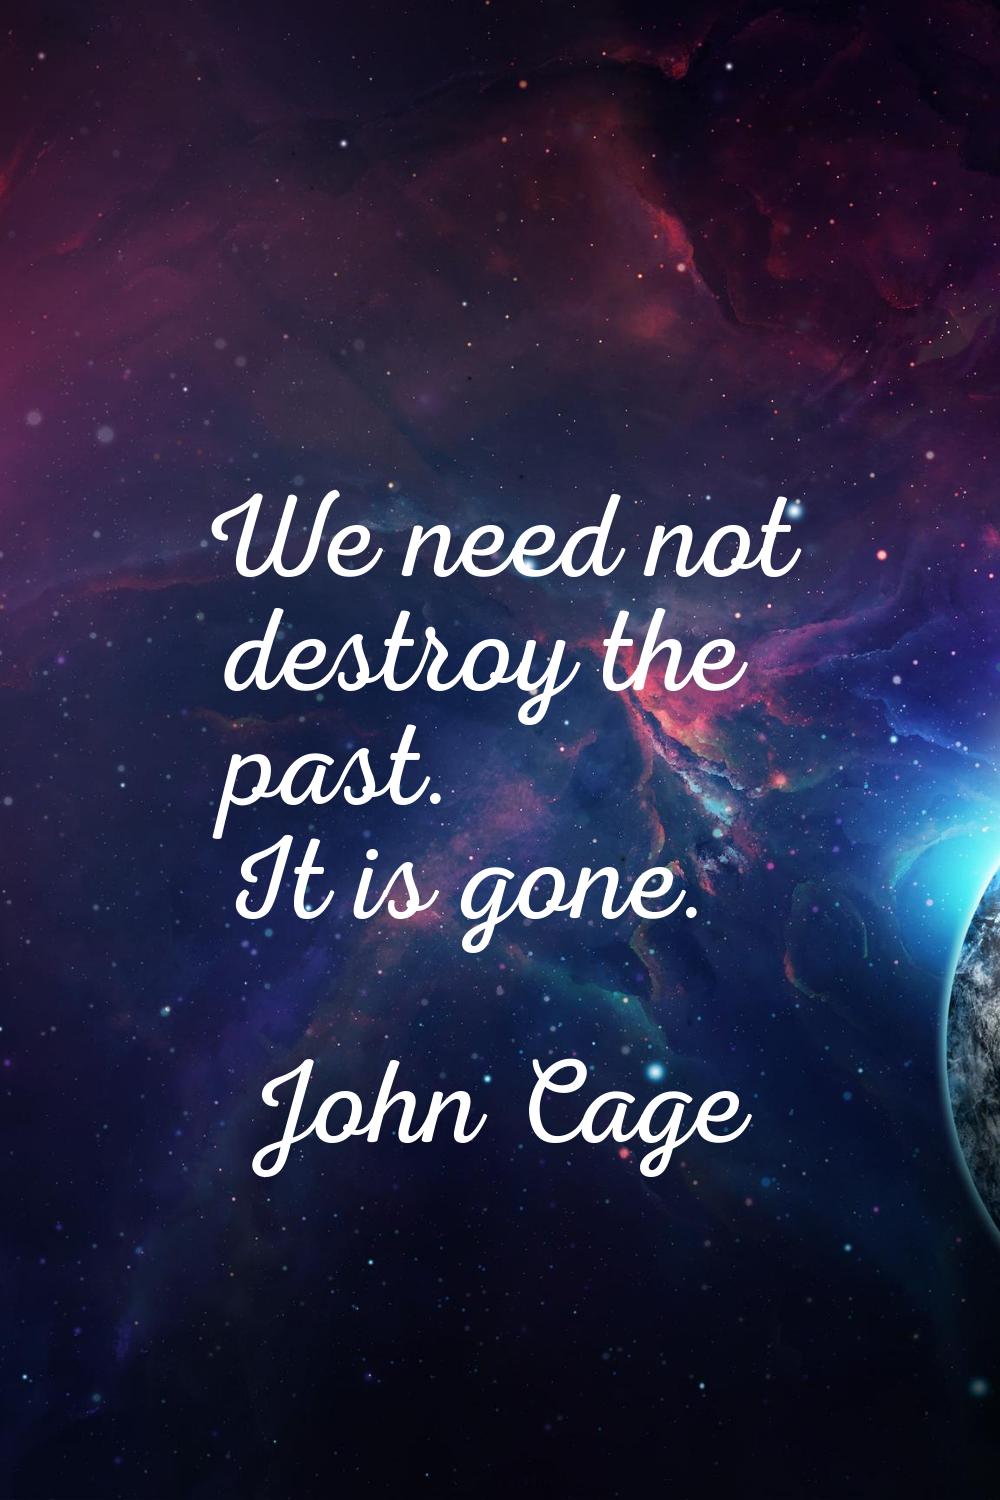 We need not destroy the past. It is gone.